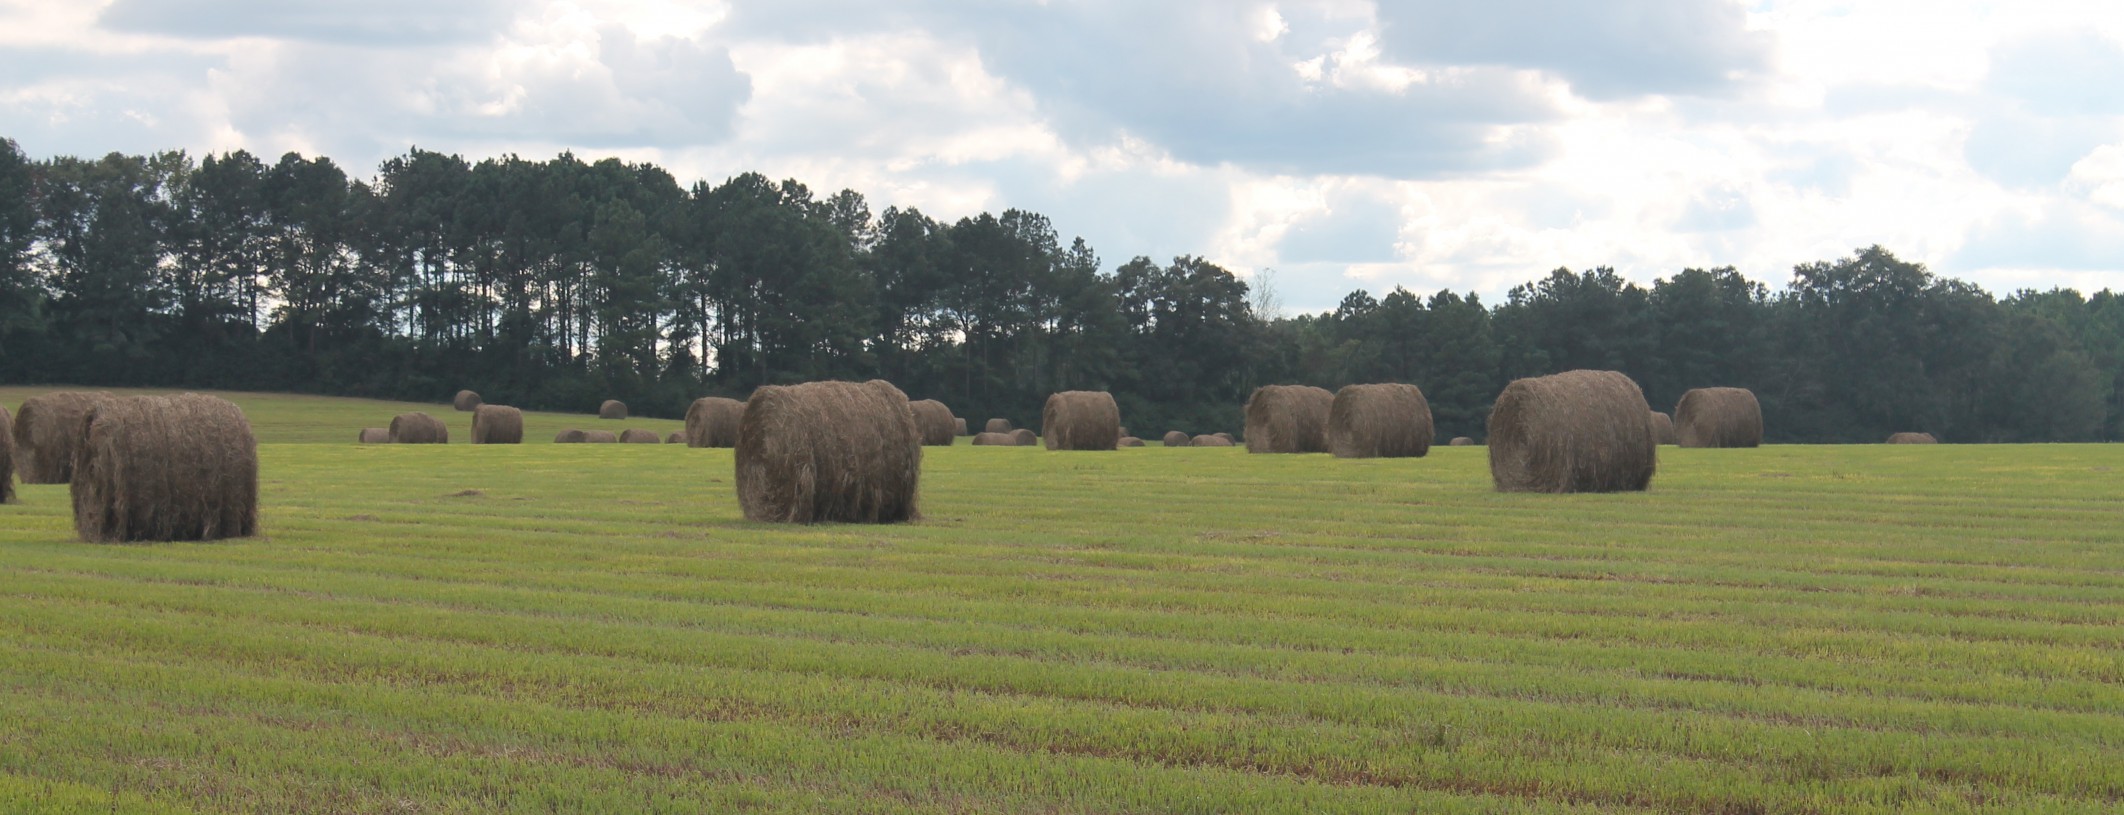 Bahiagrass hay field in Washington County this past summer.